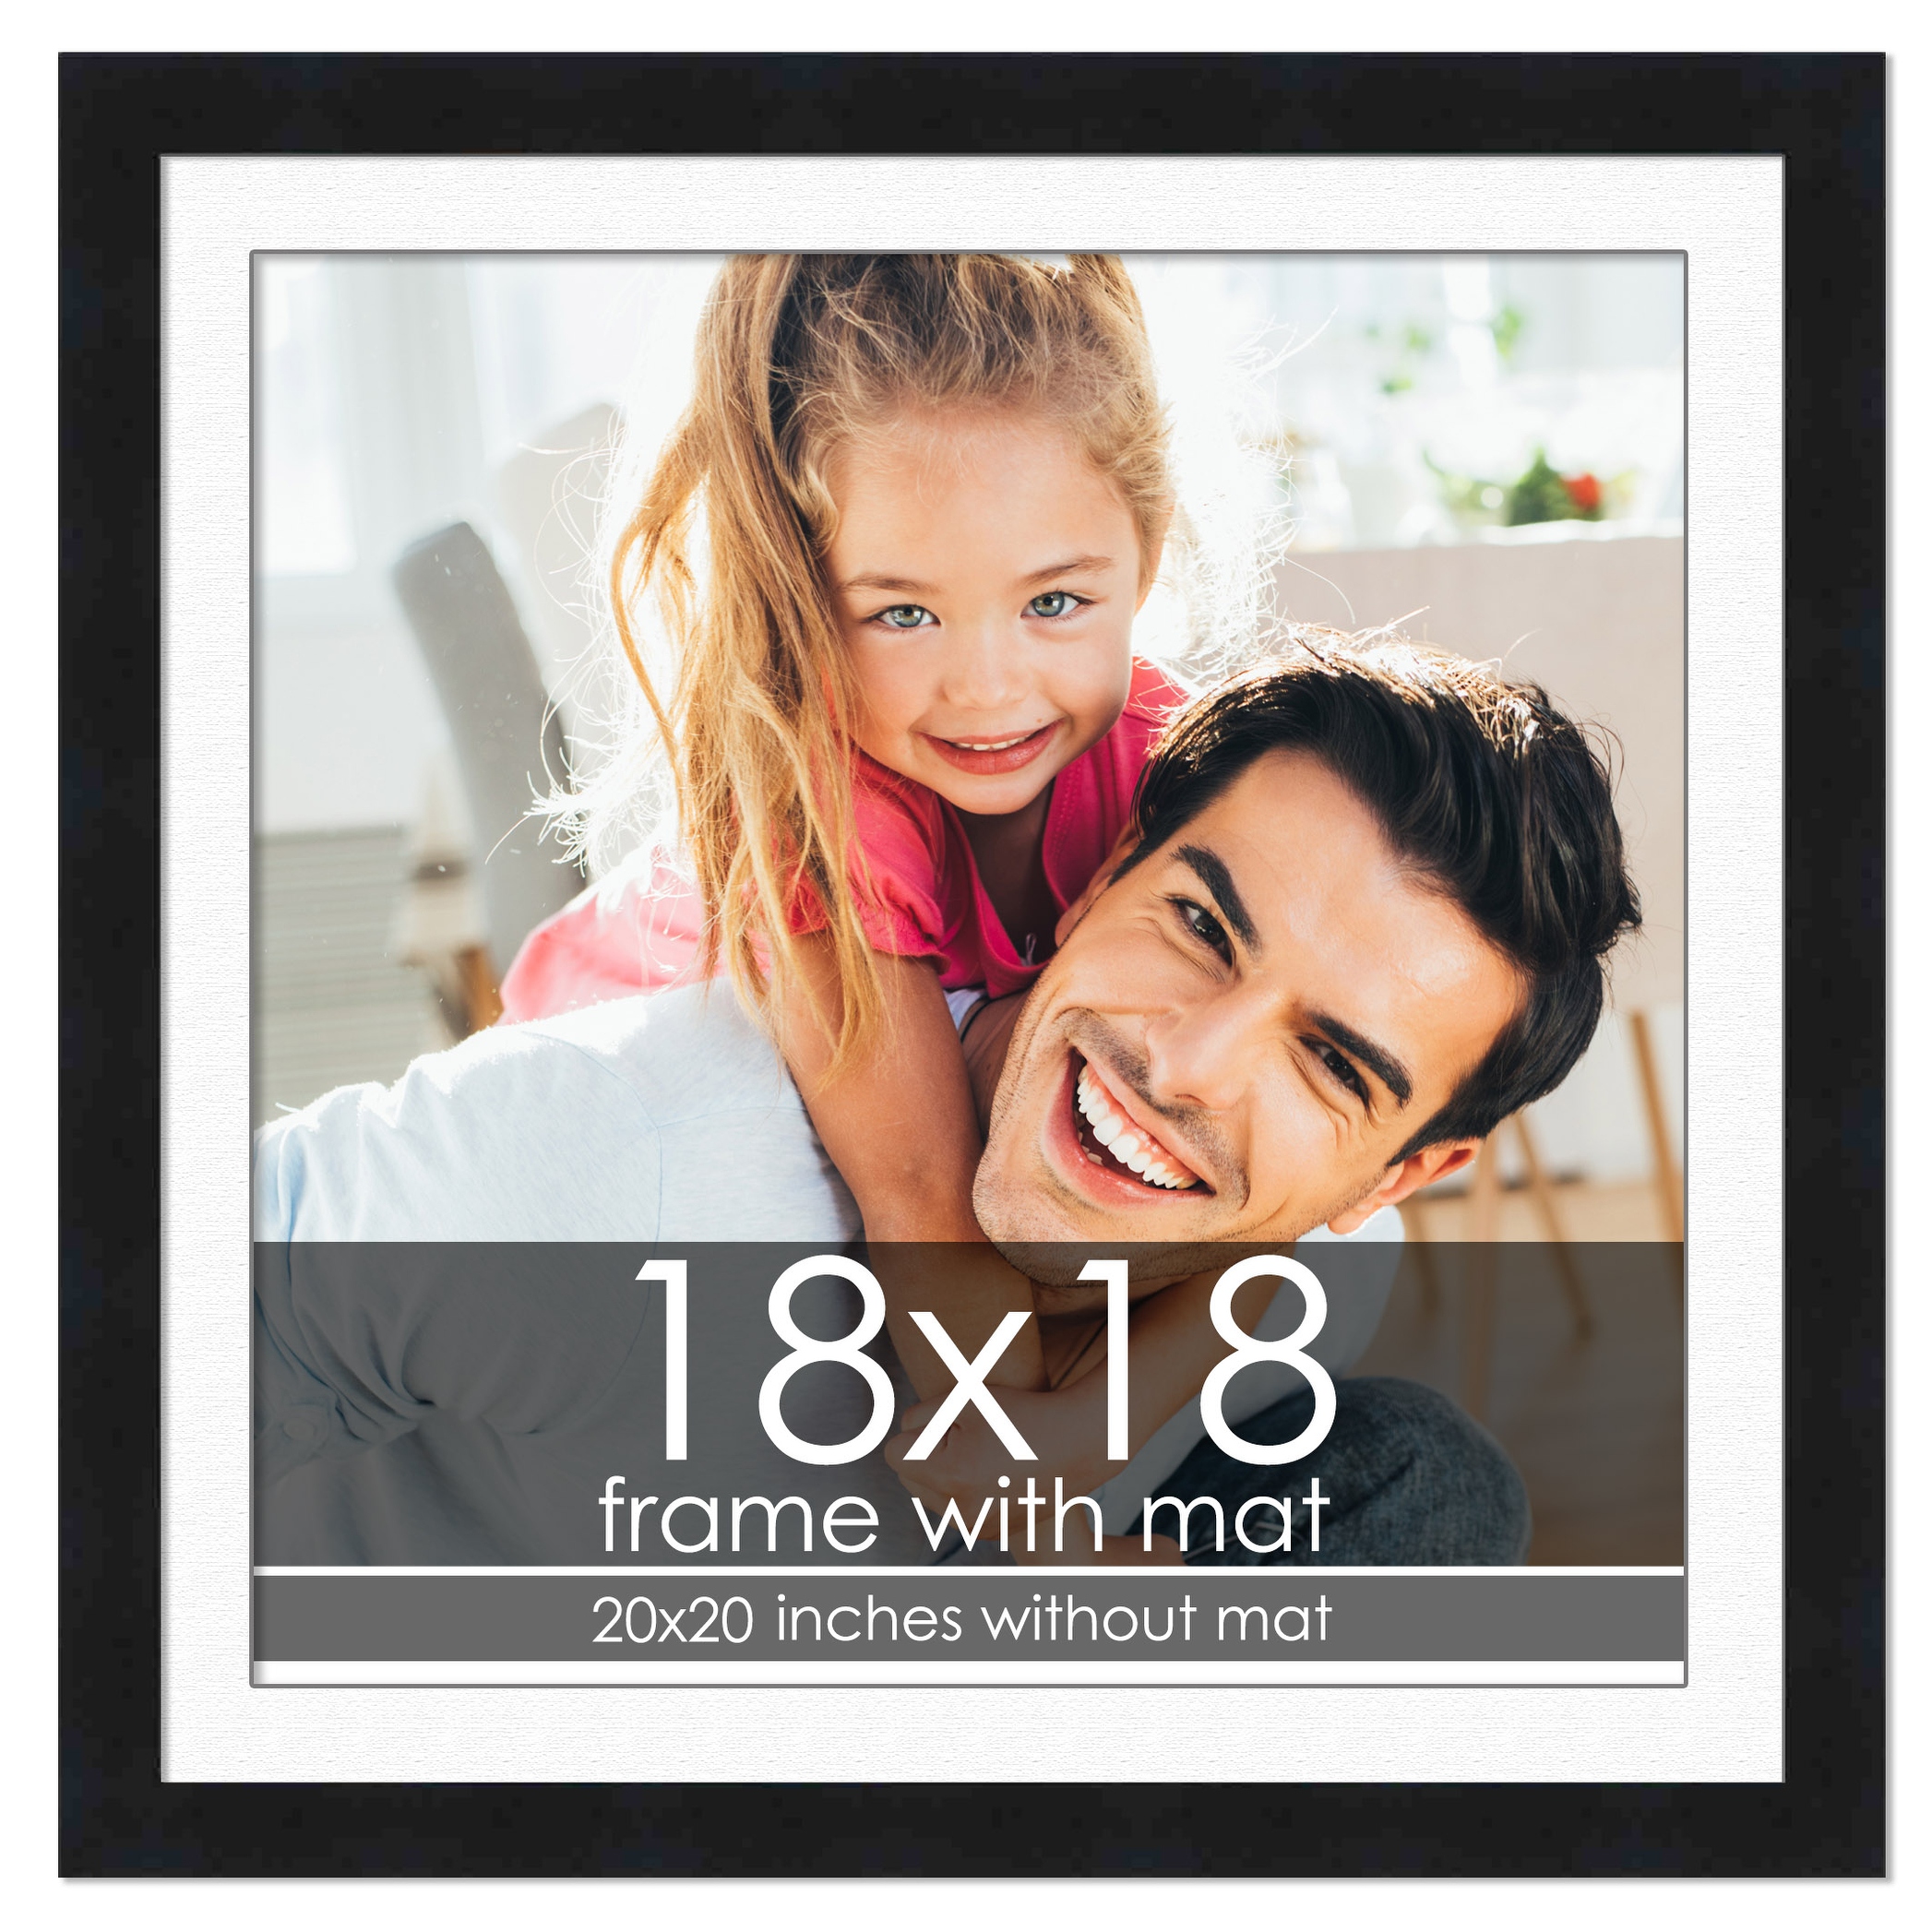 18x18 Frame with Mat - Black 20x20 Frame Wood Made to Display Print or Poster Measuring 18 x 18 Inches with White Photo Mat